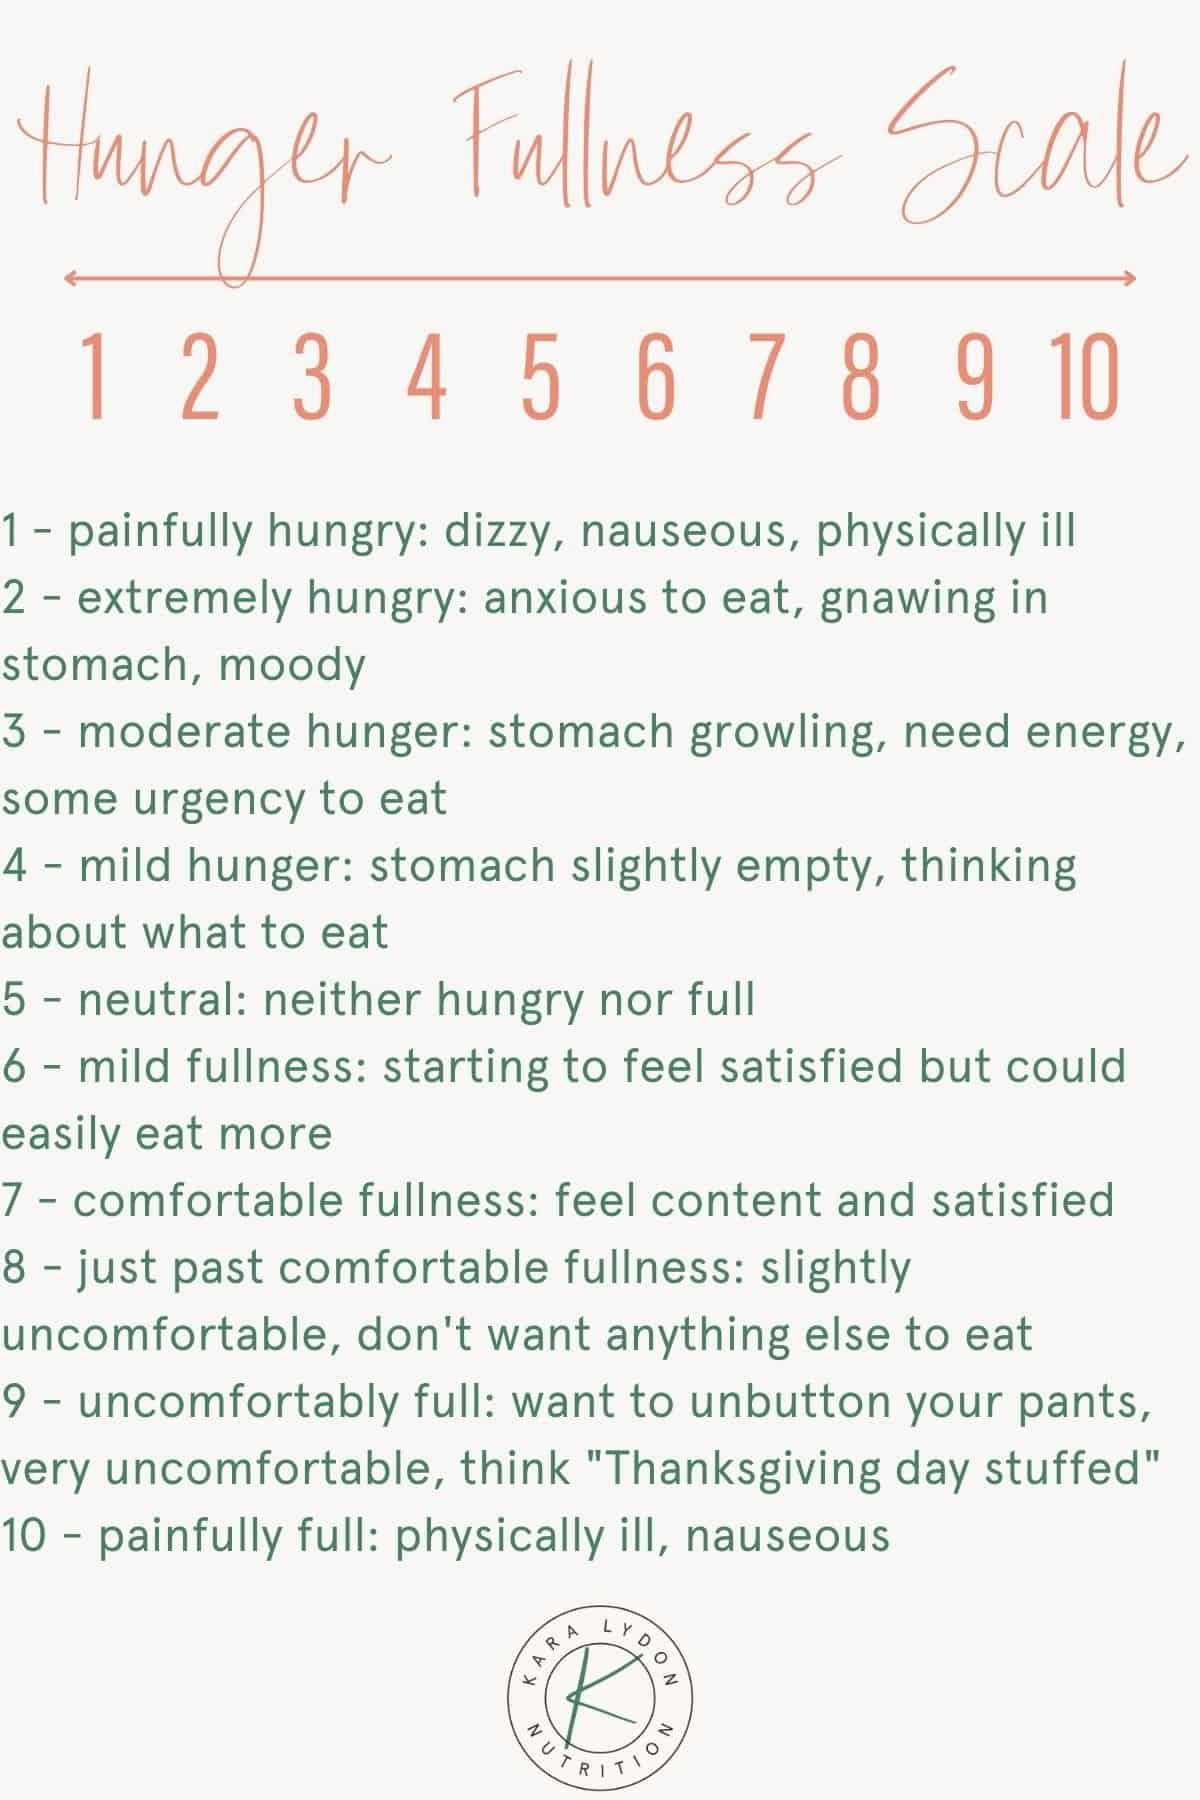 Graphic detailing the Hunger Fulness Scale